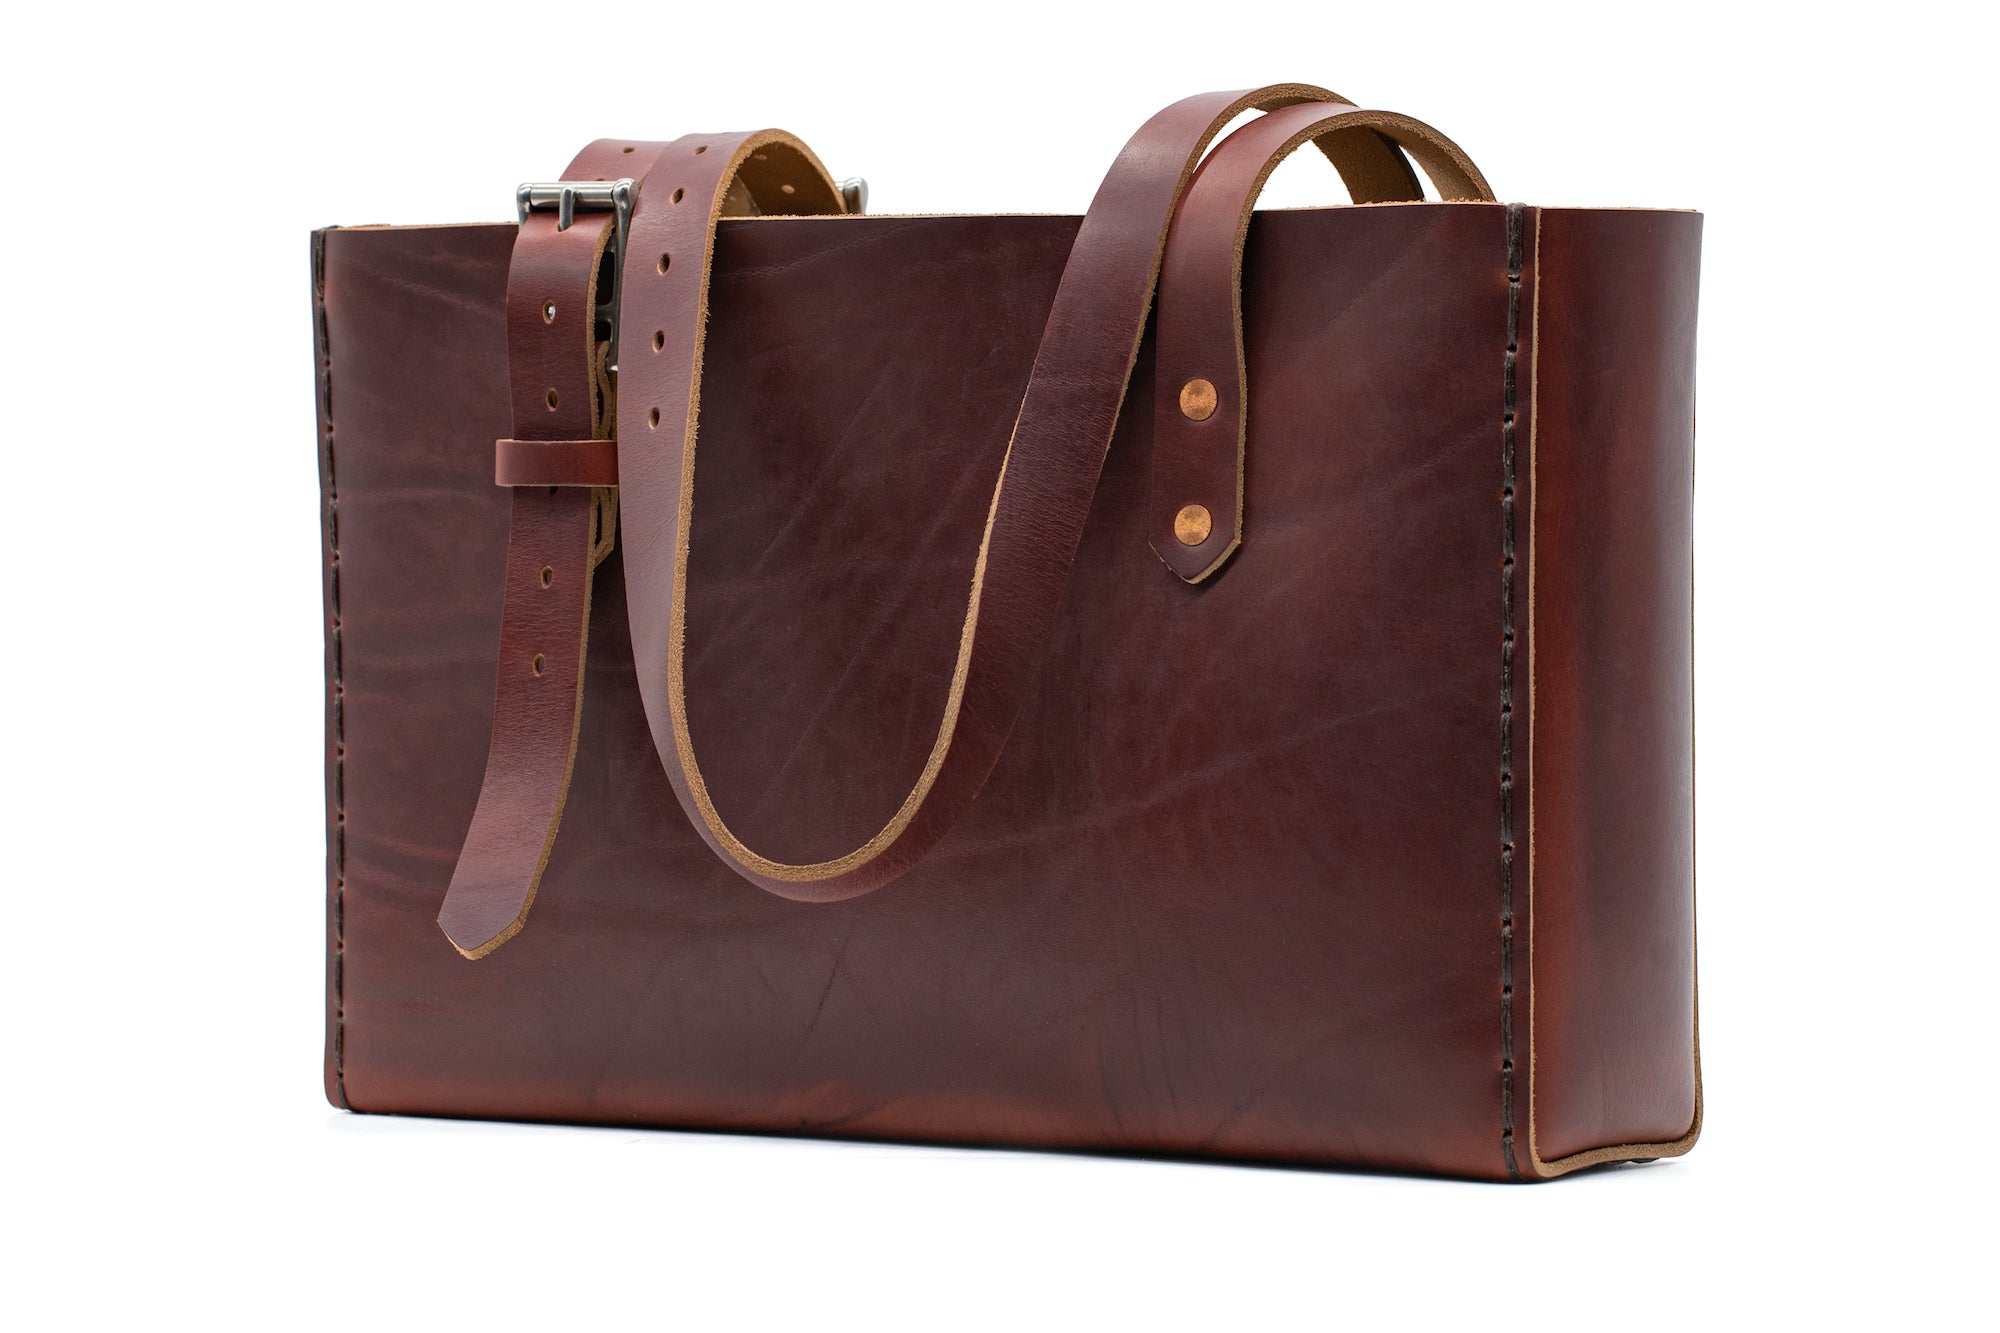 Limited Edition No. 714 Tote in Clement Brown - ONLY 1 MADE